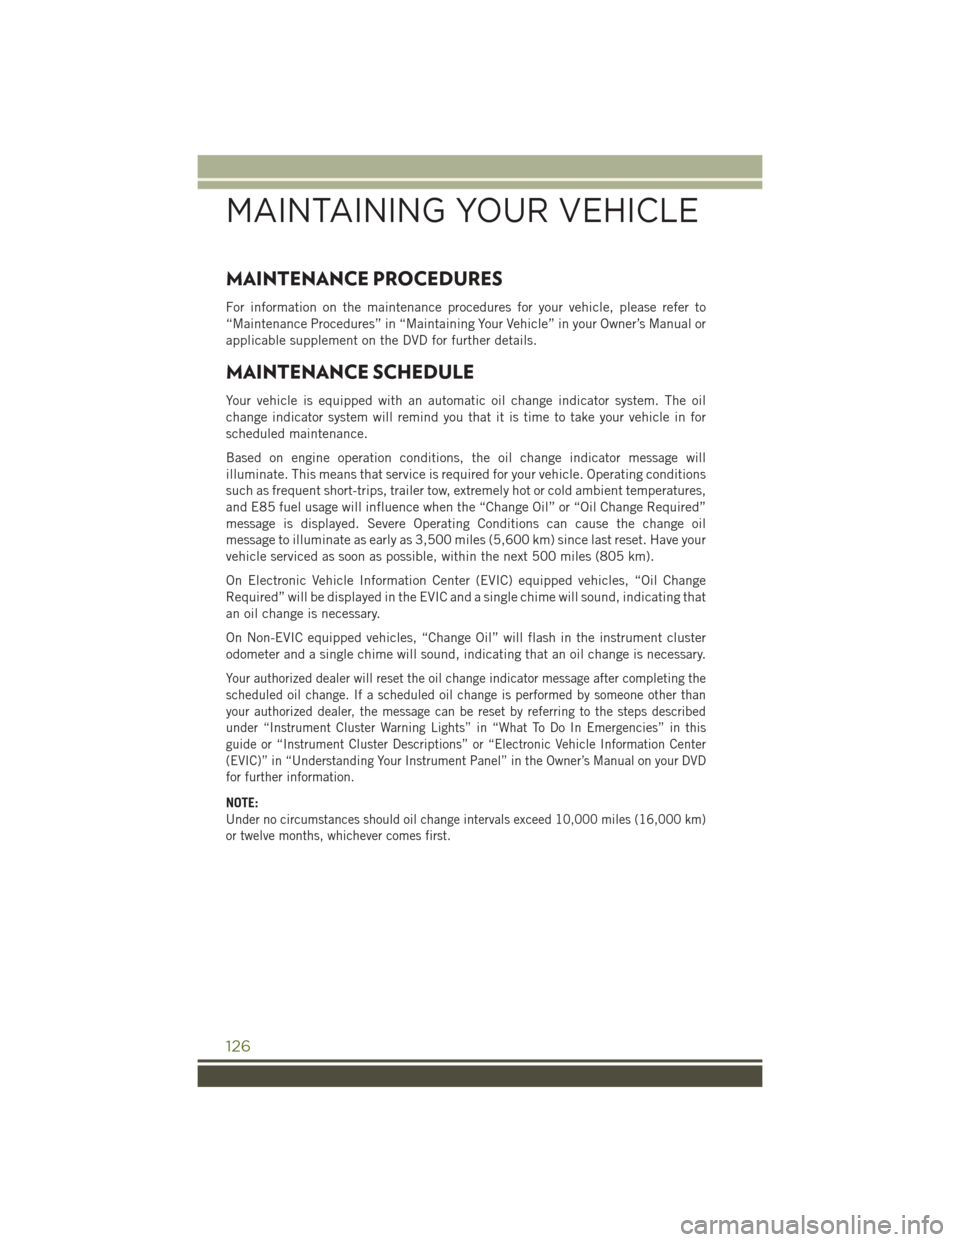 JEEP WRANGLER 2015 JK / 3.G User Guide MAINTENANCE PROCEDURES
For information on the maintenance procedures for your vehicle, please refer to
“Maintenance Procedures” in “Maintaining Your Vehicle” in your Owner’s Manual or
applic